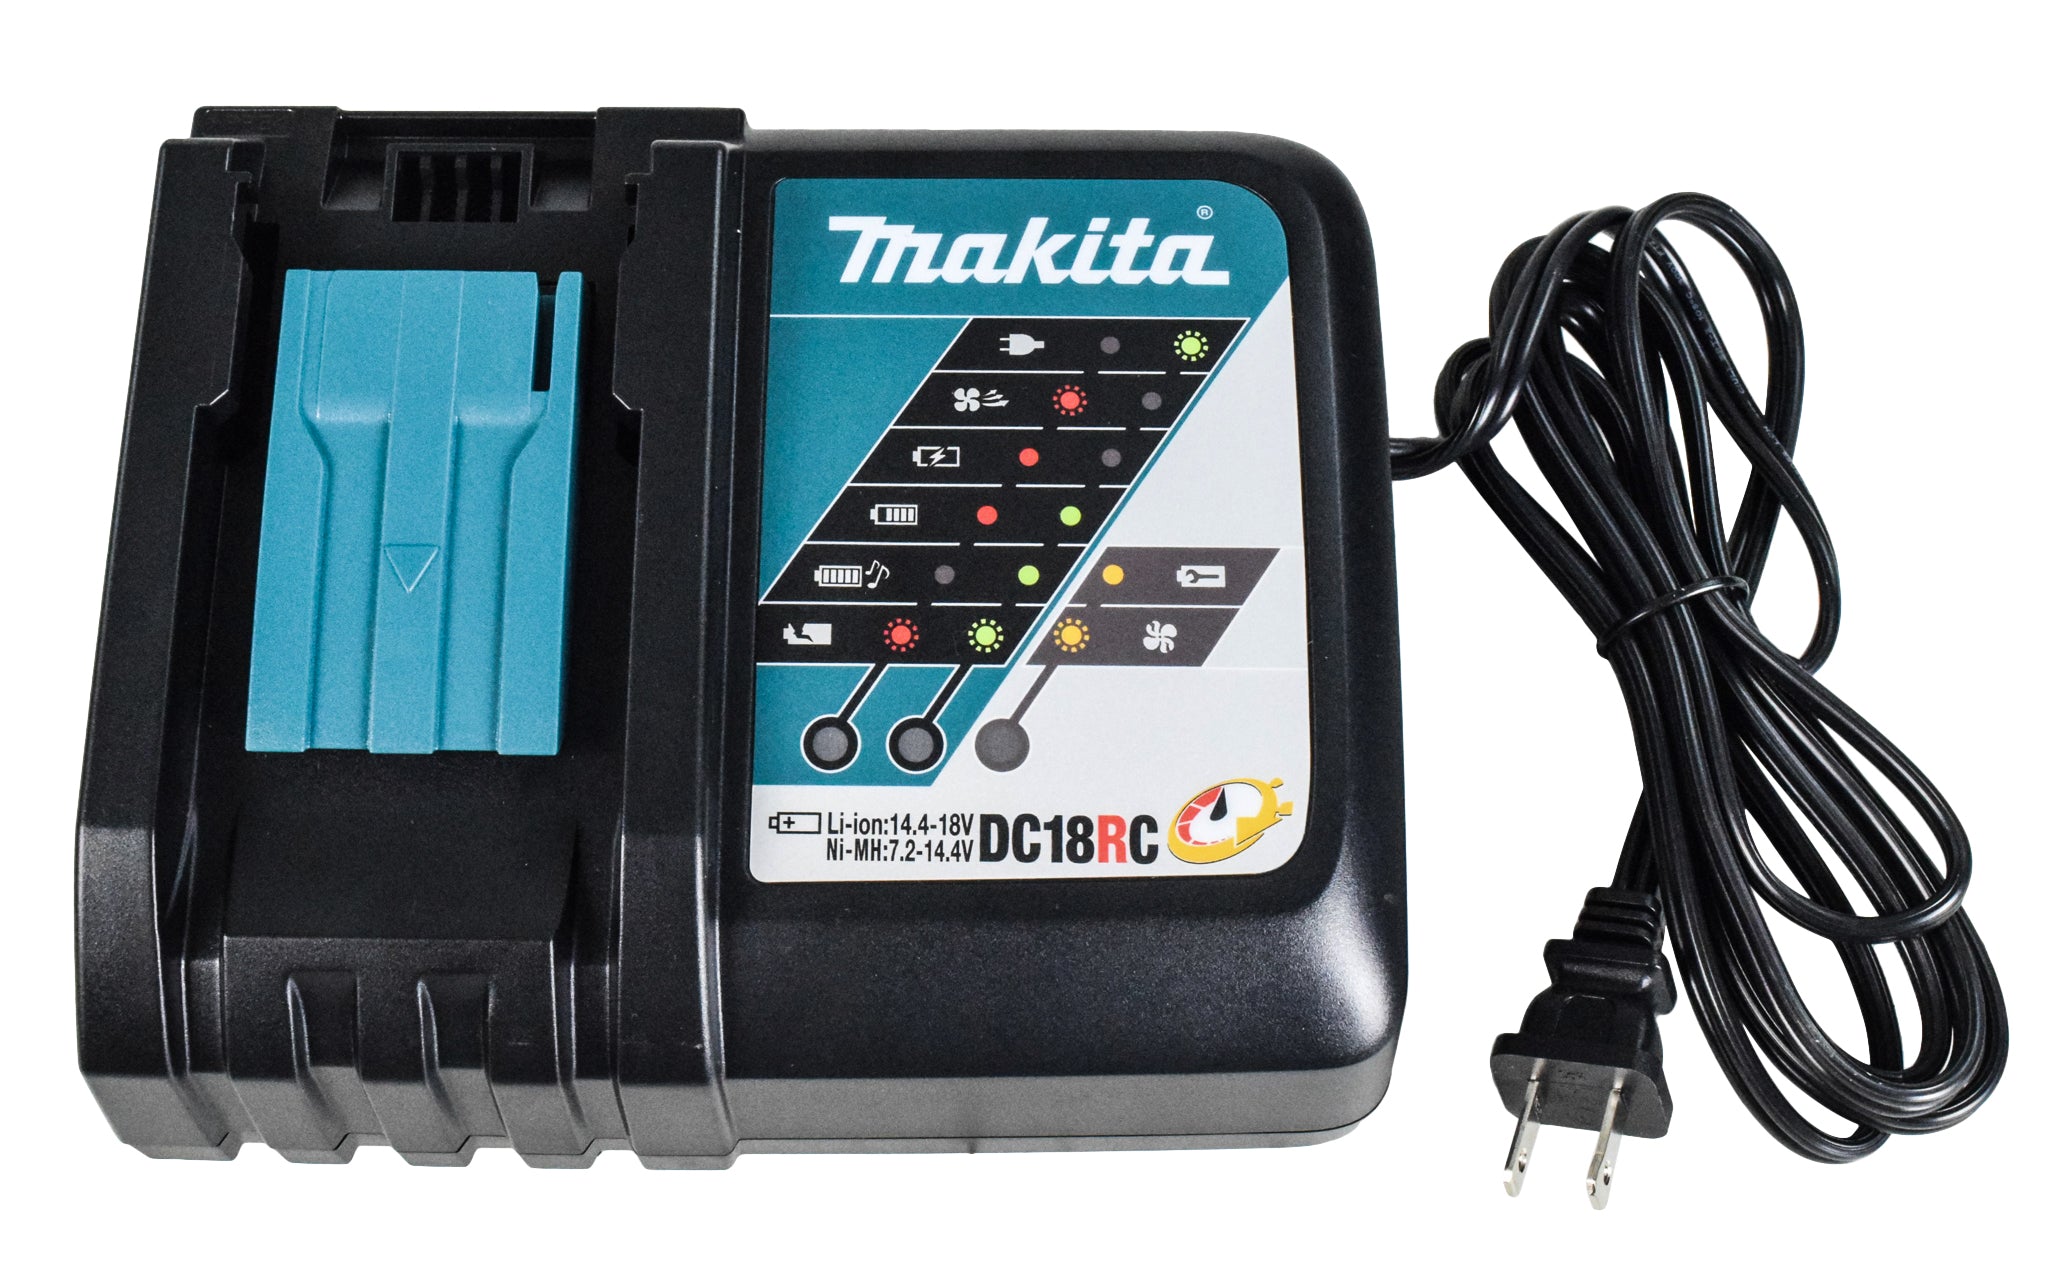 Makita BL1840DC1 18V LXT 5.0 Ah Lithium-Ion Battery w/ Charger Starter Pack